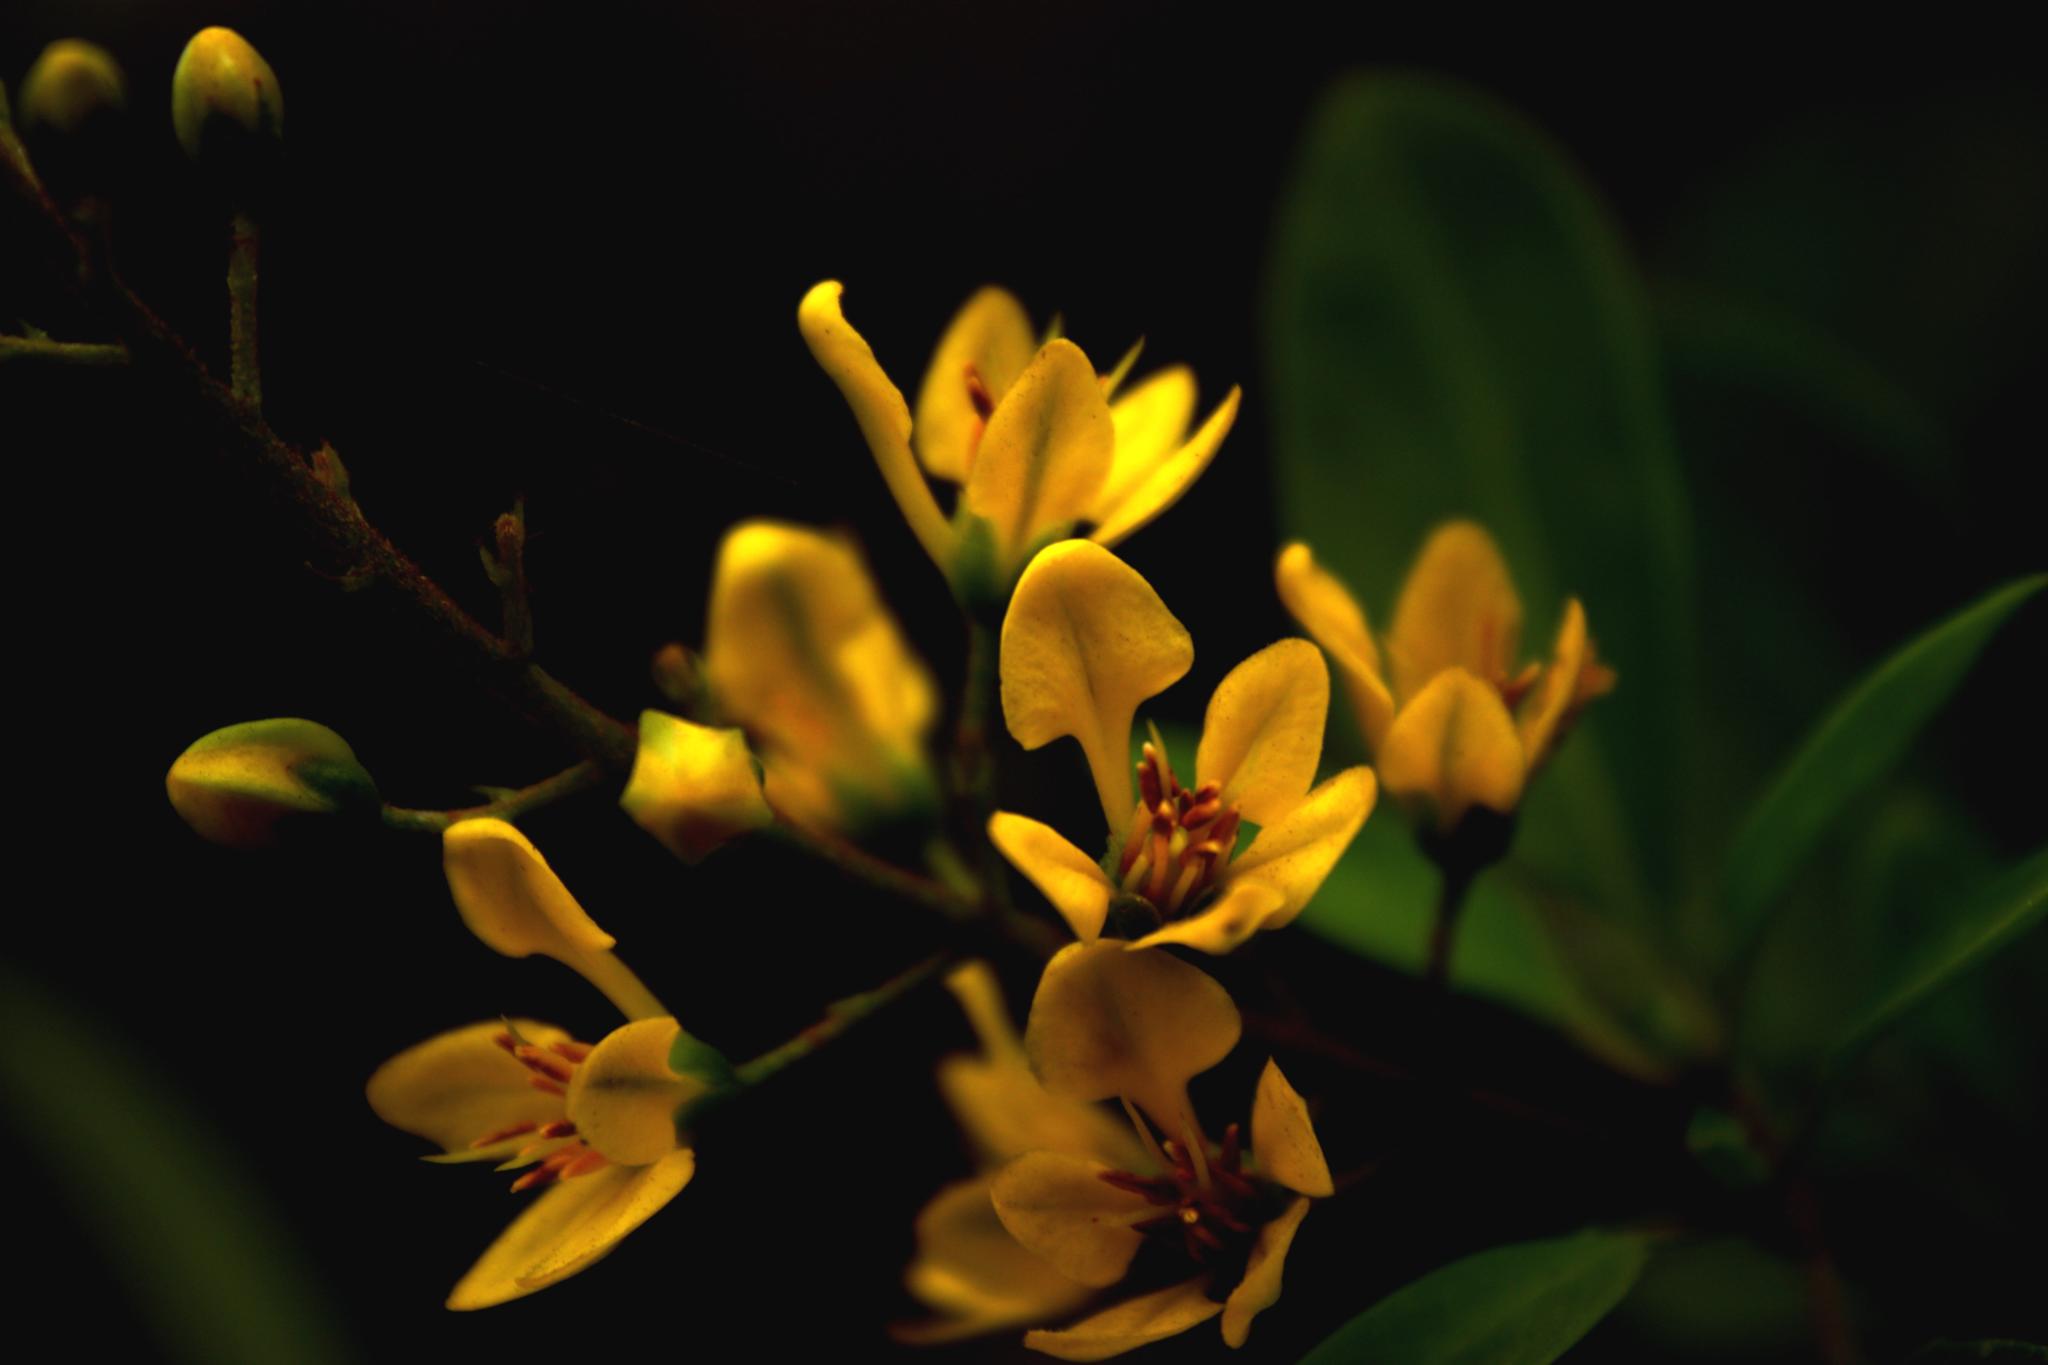 yellow flowers are in bloom in the dark